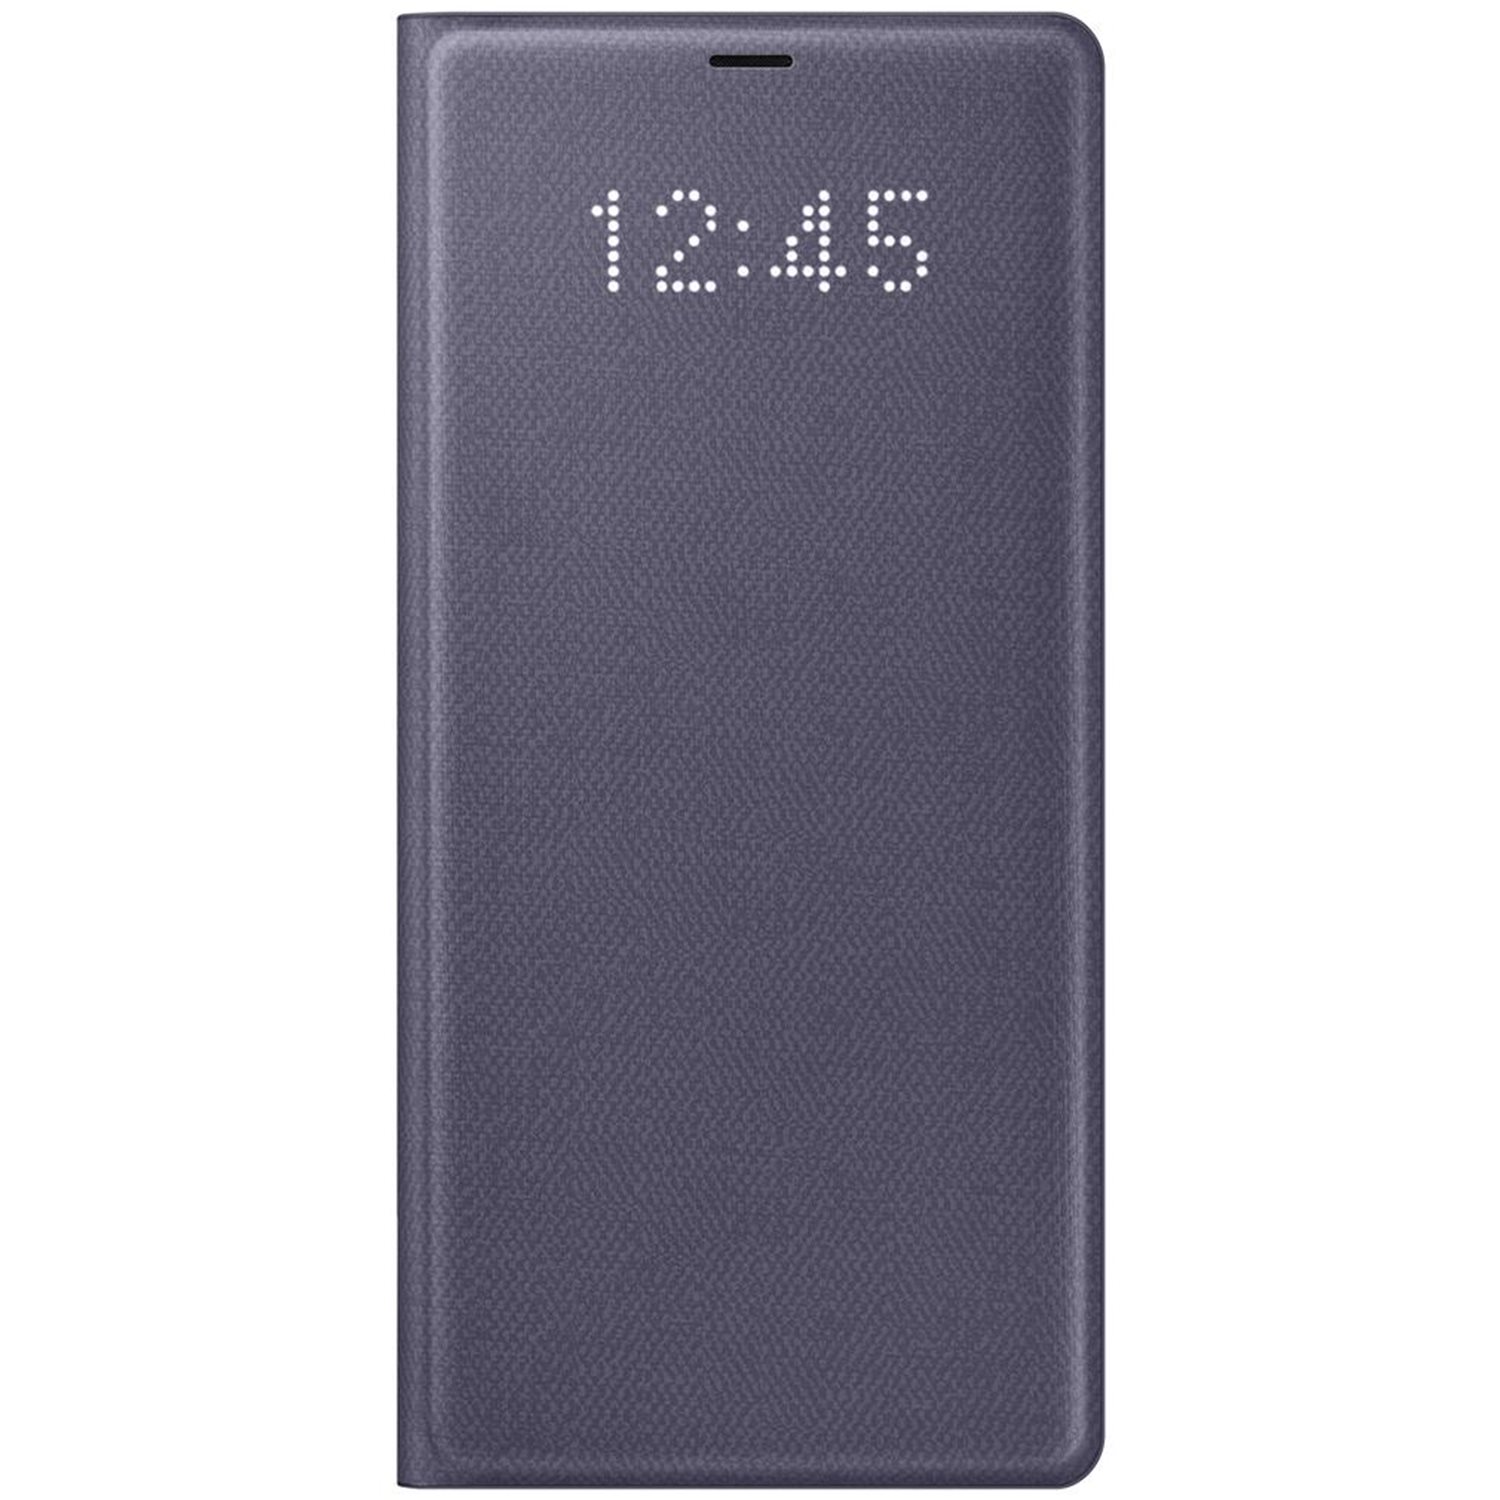 Official Samsung Galaxy Note 8 LED View Cover Case - Orchid Grey